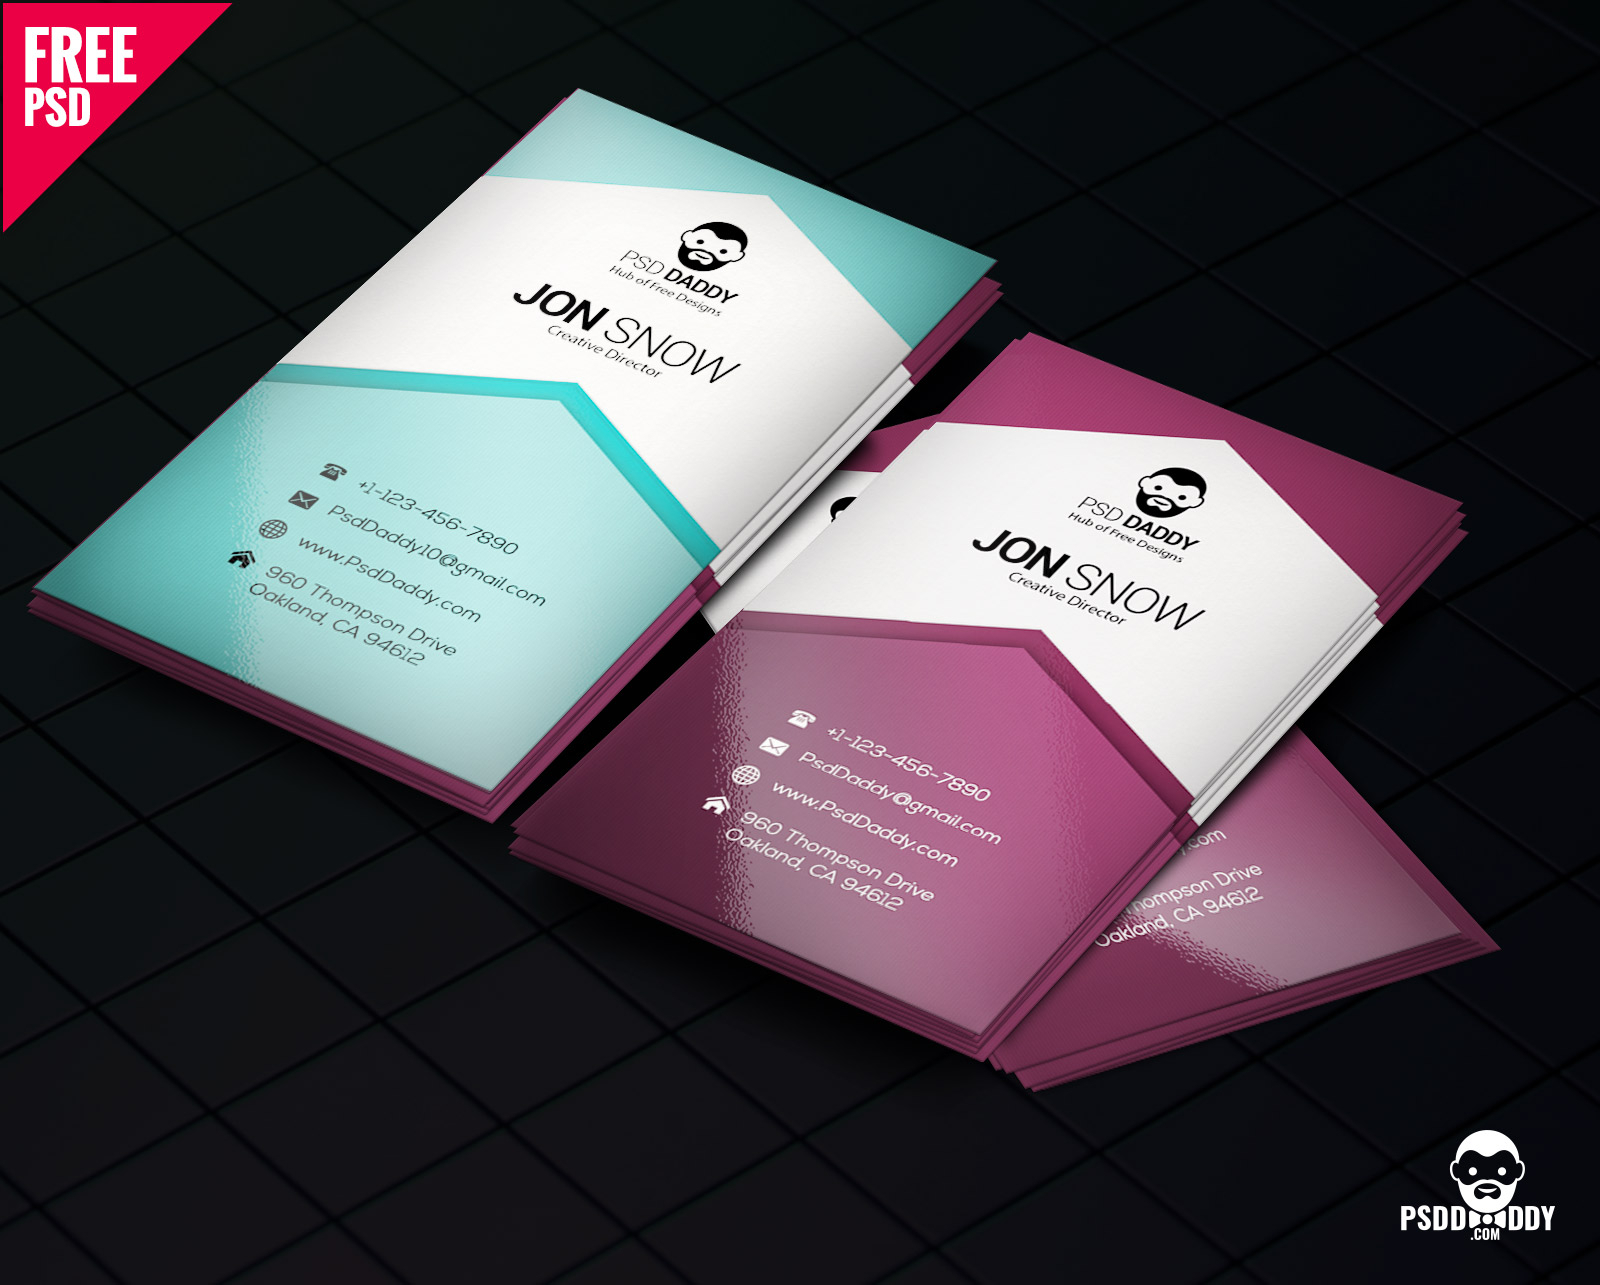 Download]Creative Business Card Psd Free | Psddaddy Pertaining To Business Card Size Psd Template